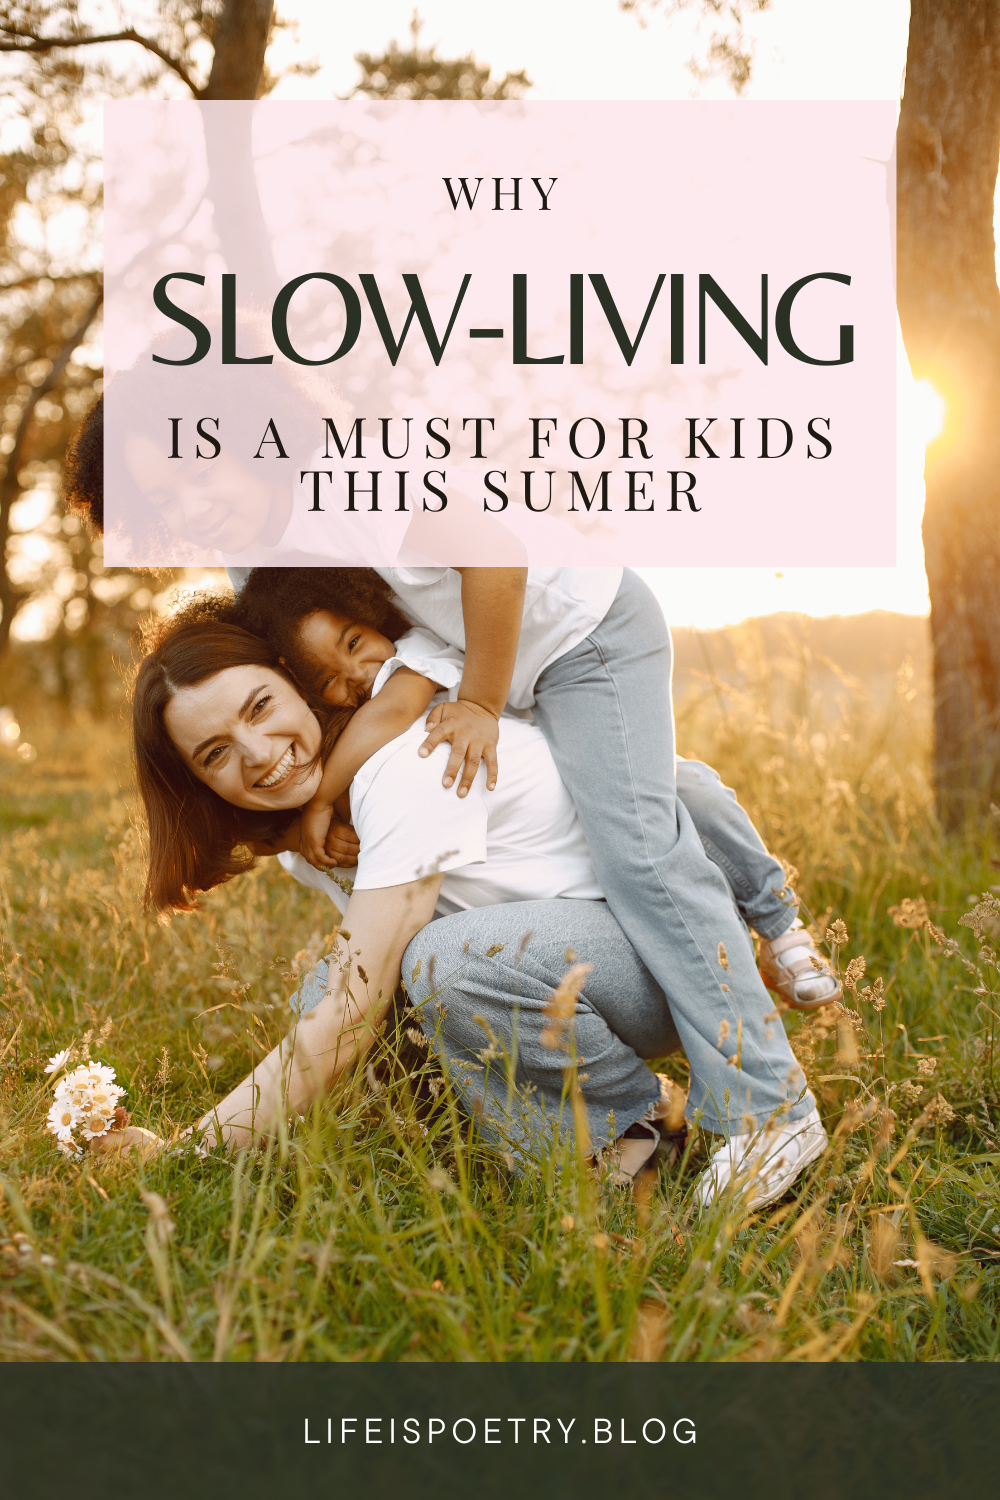 How Slow Living Makes Summer Unforgettable for Kids